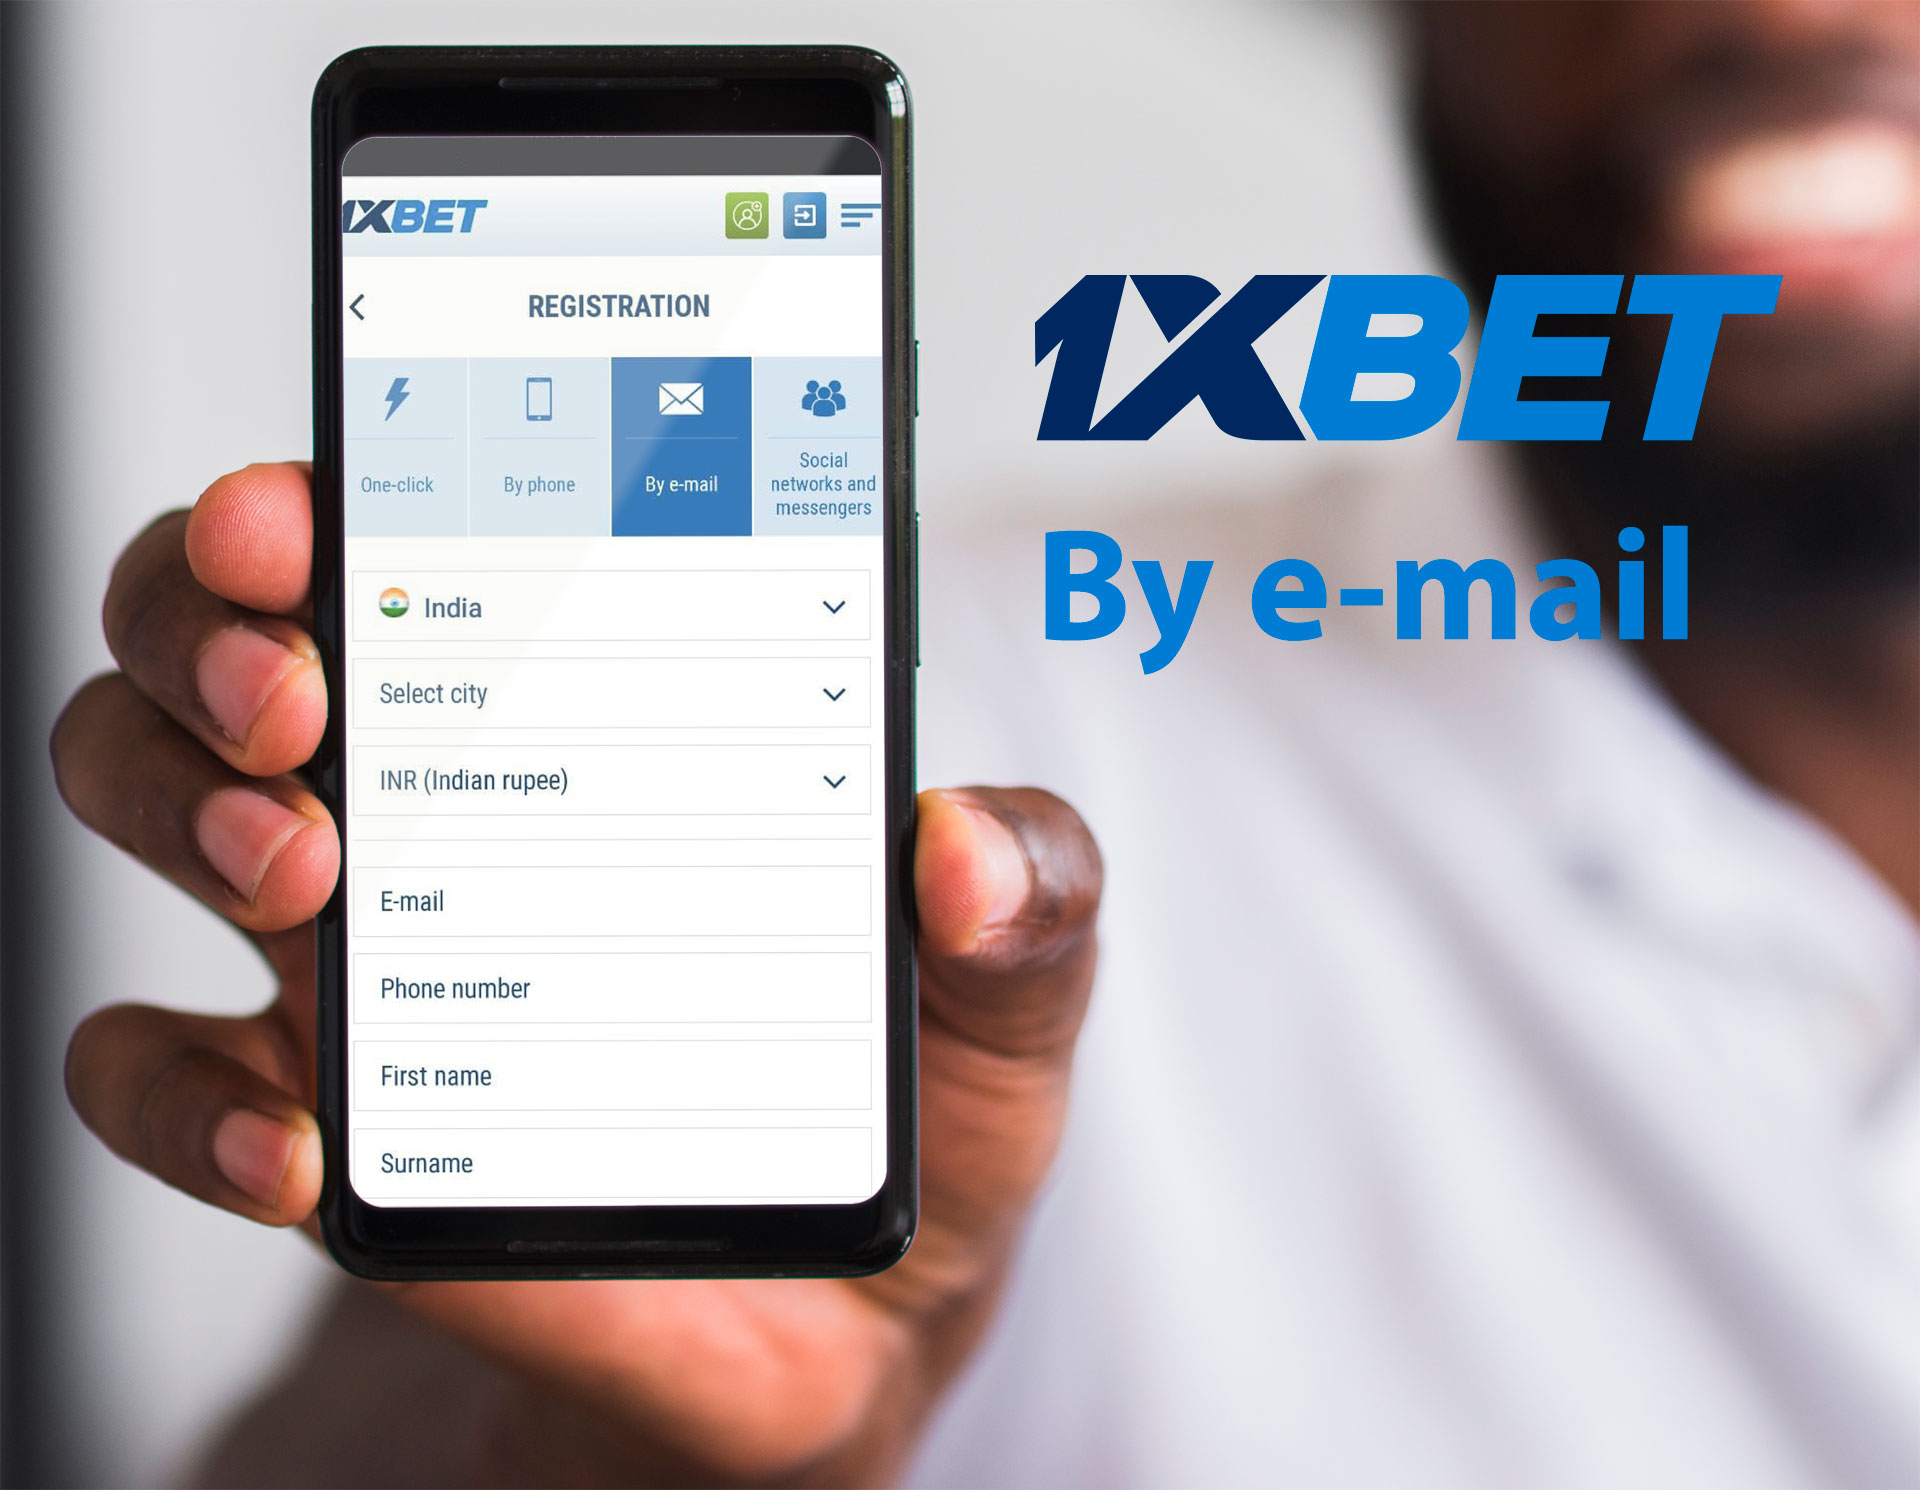 Use your email for the fullest registration in 1xbet.